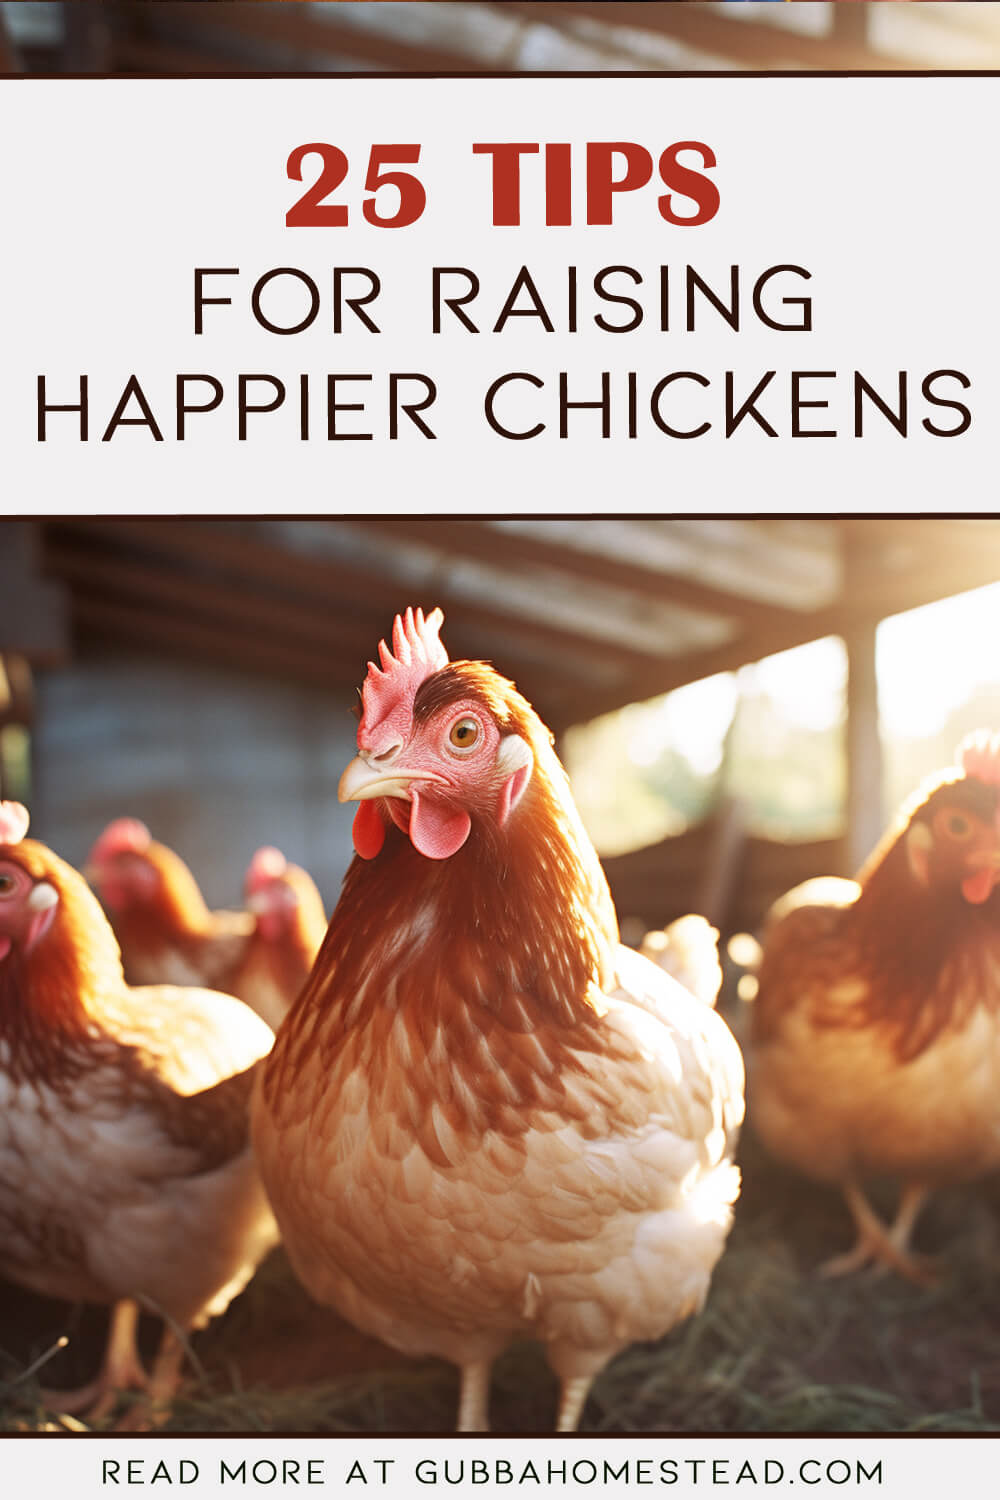 25 Tips for Raising Happier Chickens